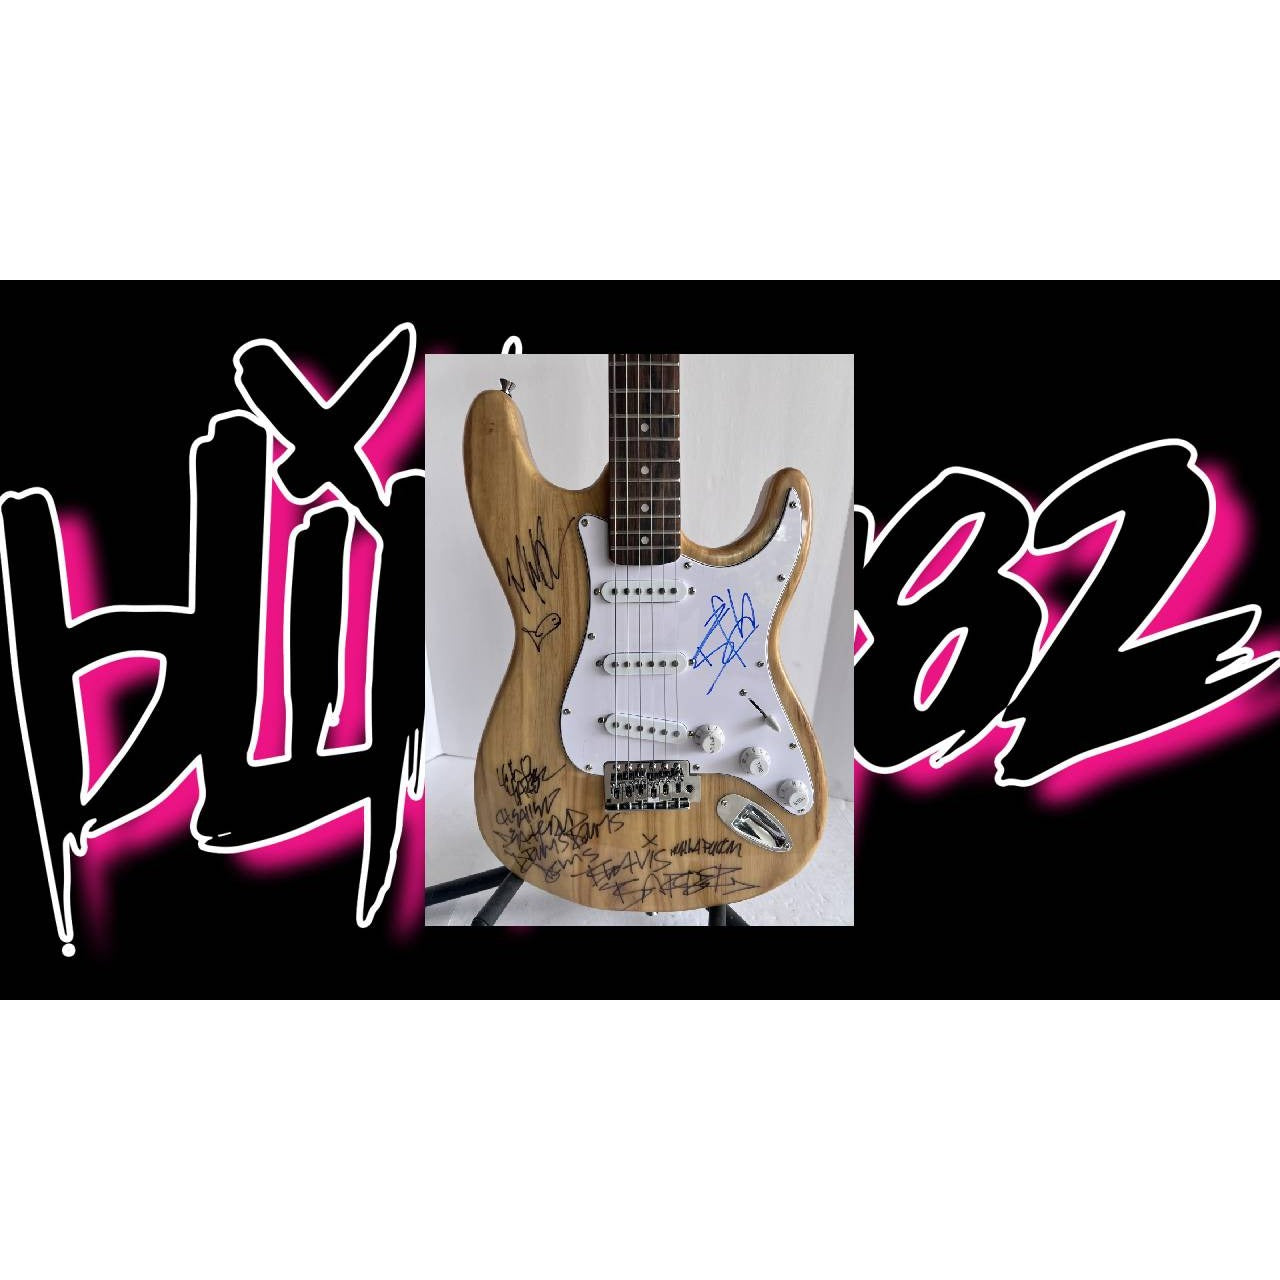 Blink-182 full size Stratocaster electric guitar signed with proof